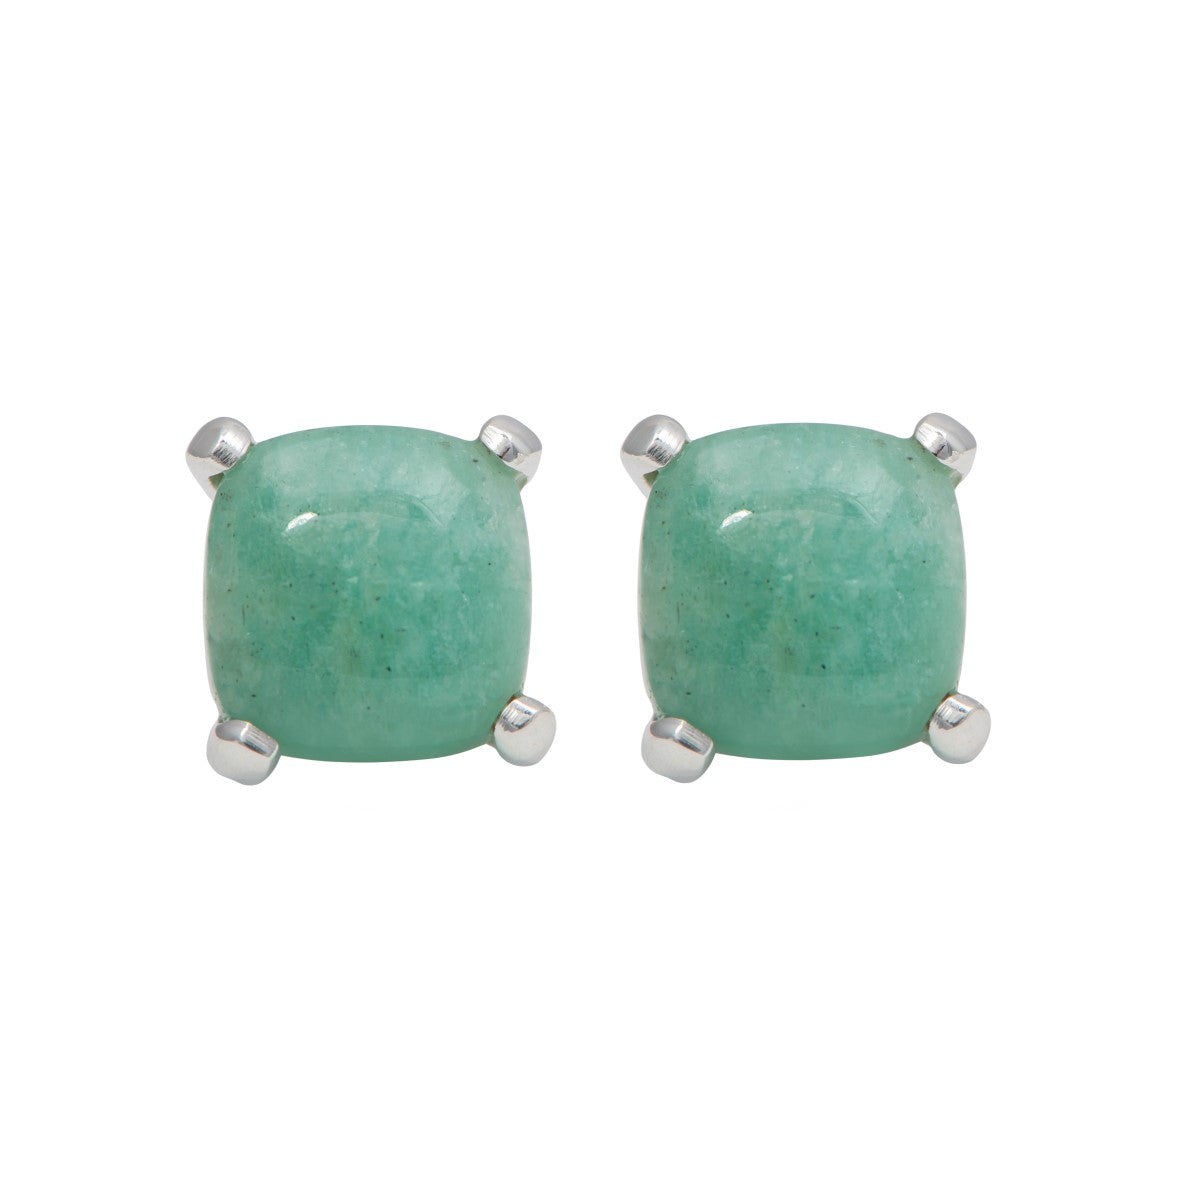 Square Cabochon Amazonite Stud Earrings in Sterling Silver